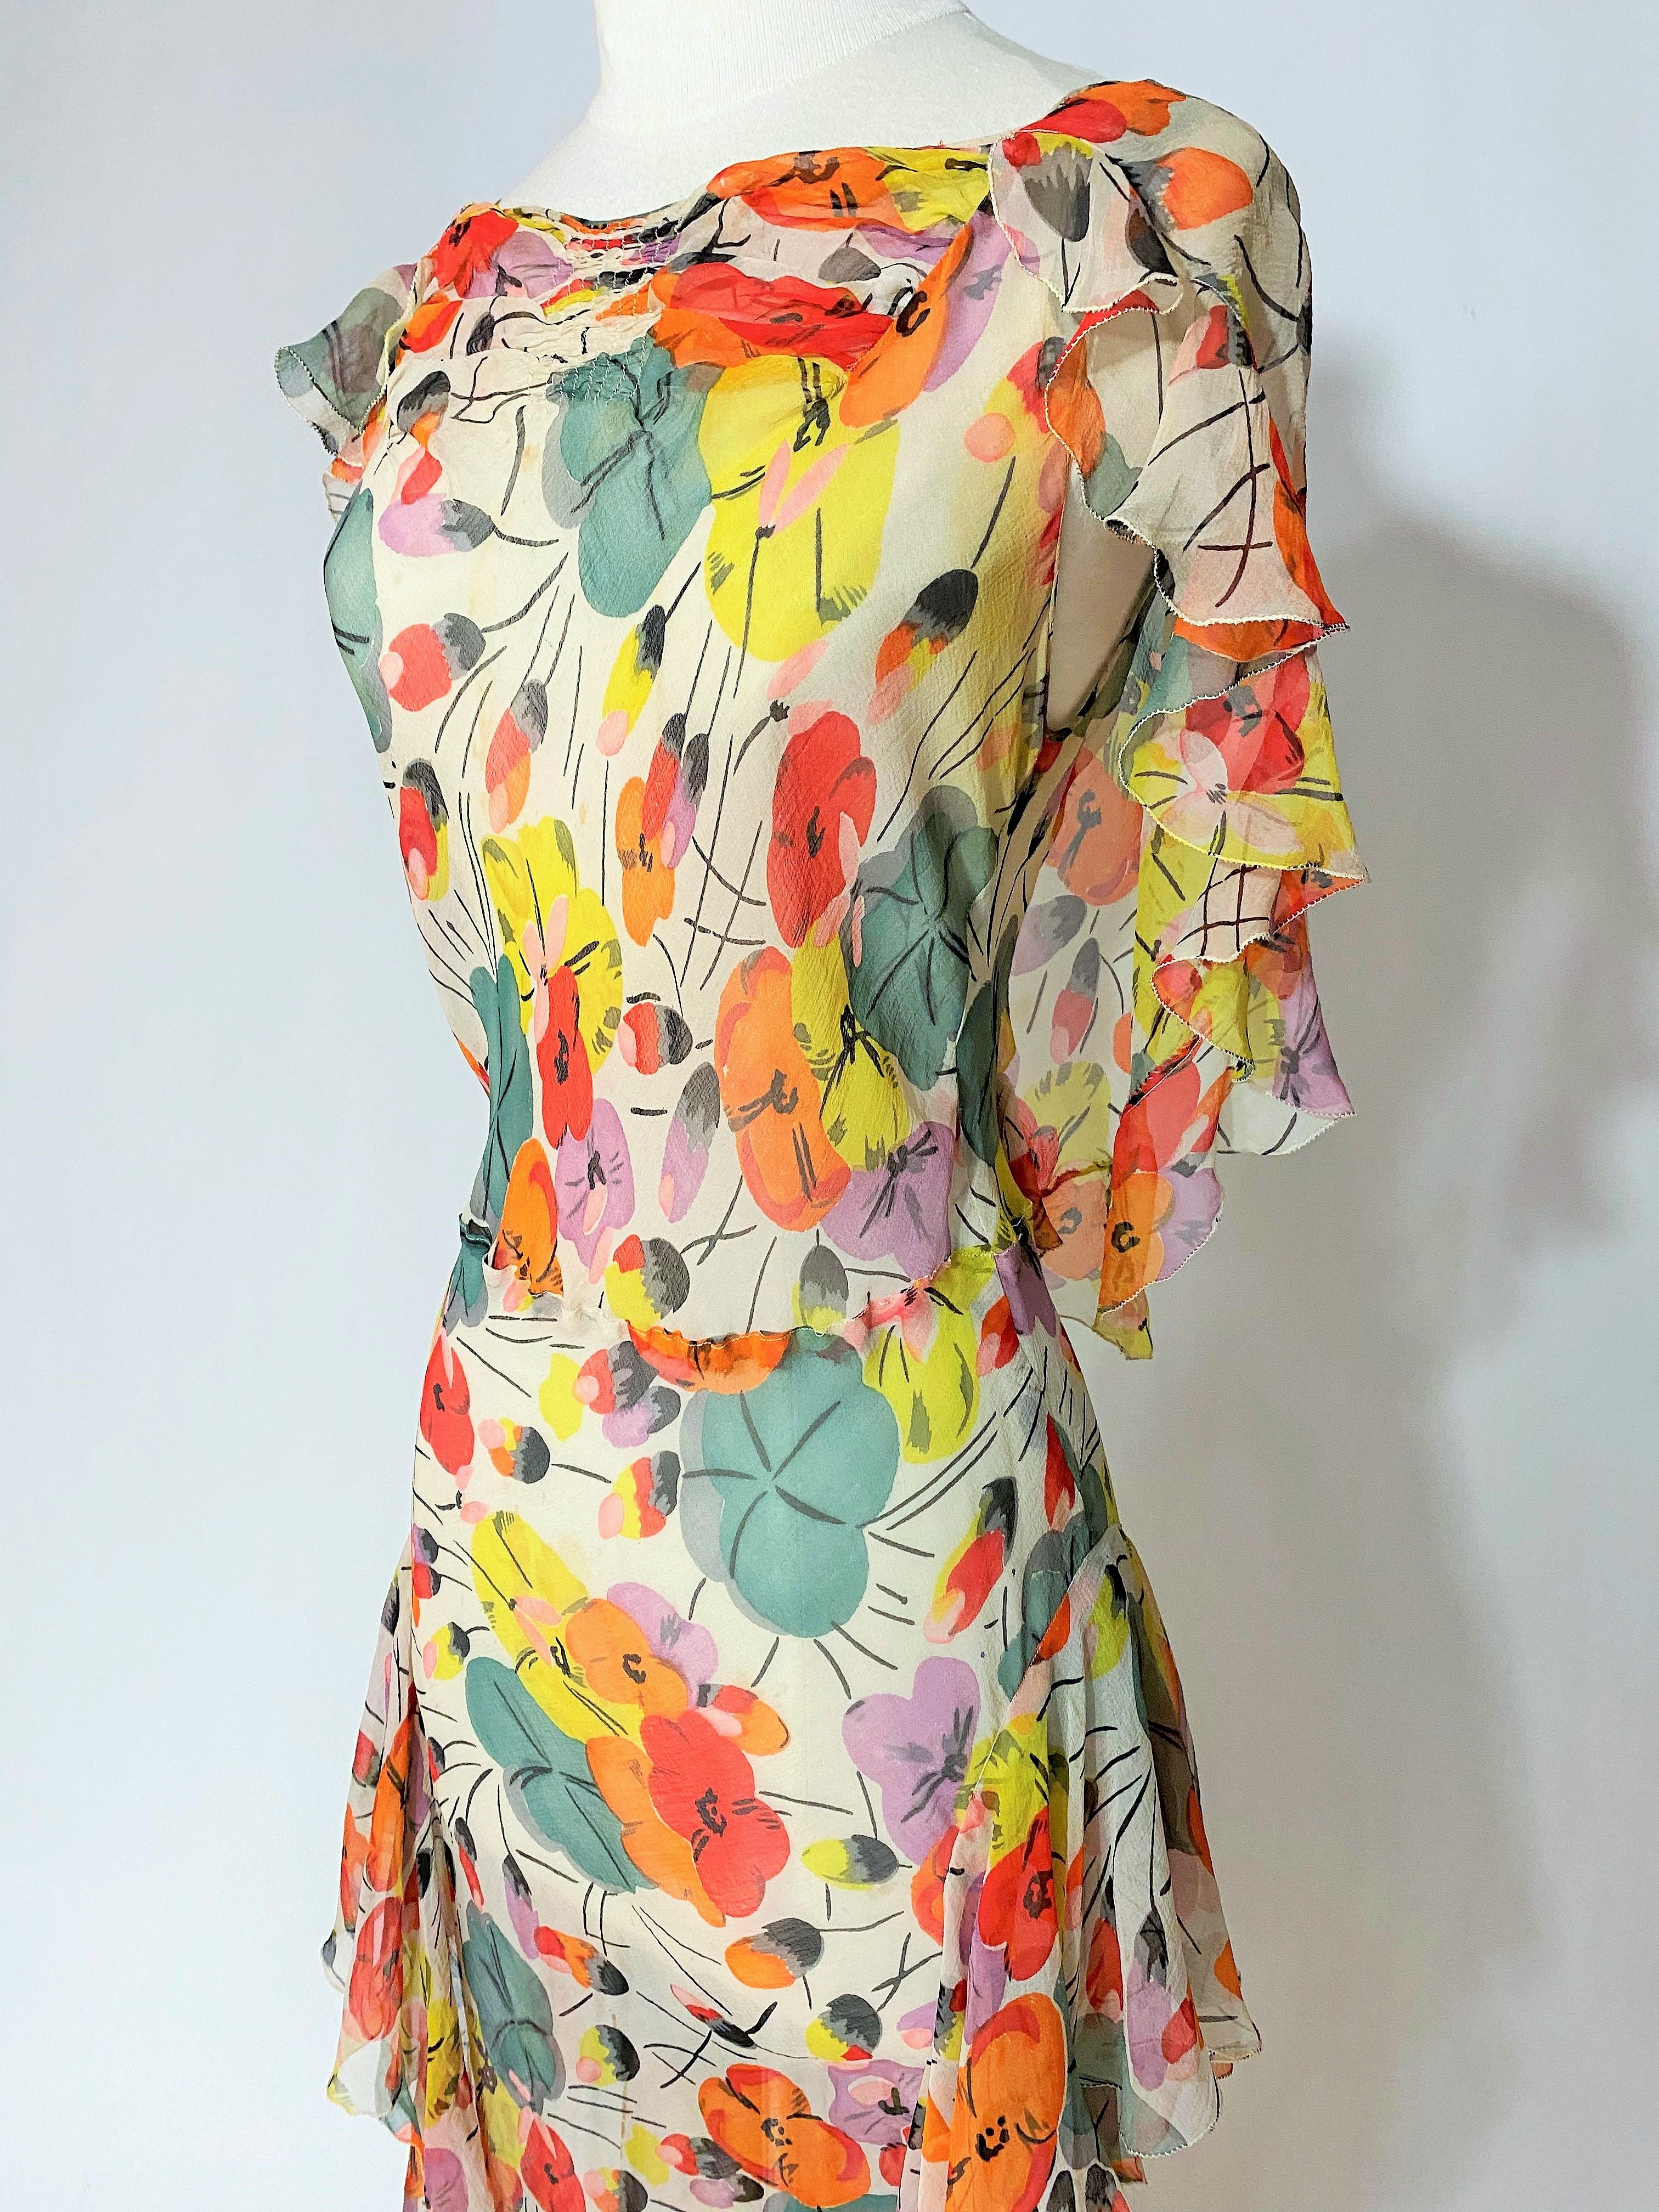 Circa 1938-1940
France

Beautiful summer long dress in silk crepe muslin printed with large polychrome flowers (poppies?) and inspired by Raoul Dufy's creations. Sleeveless sheath dress with fine pleats underlining the chest and large flounces on